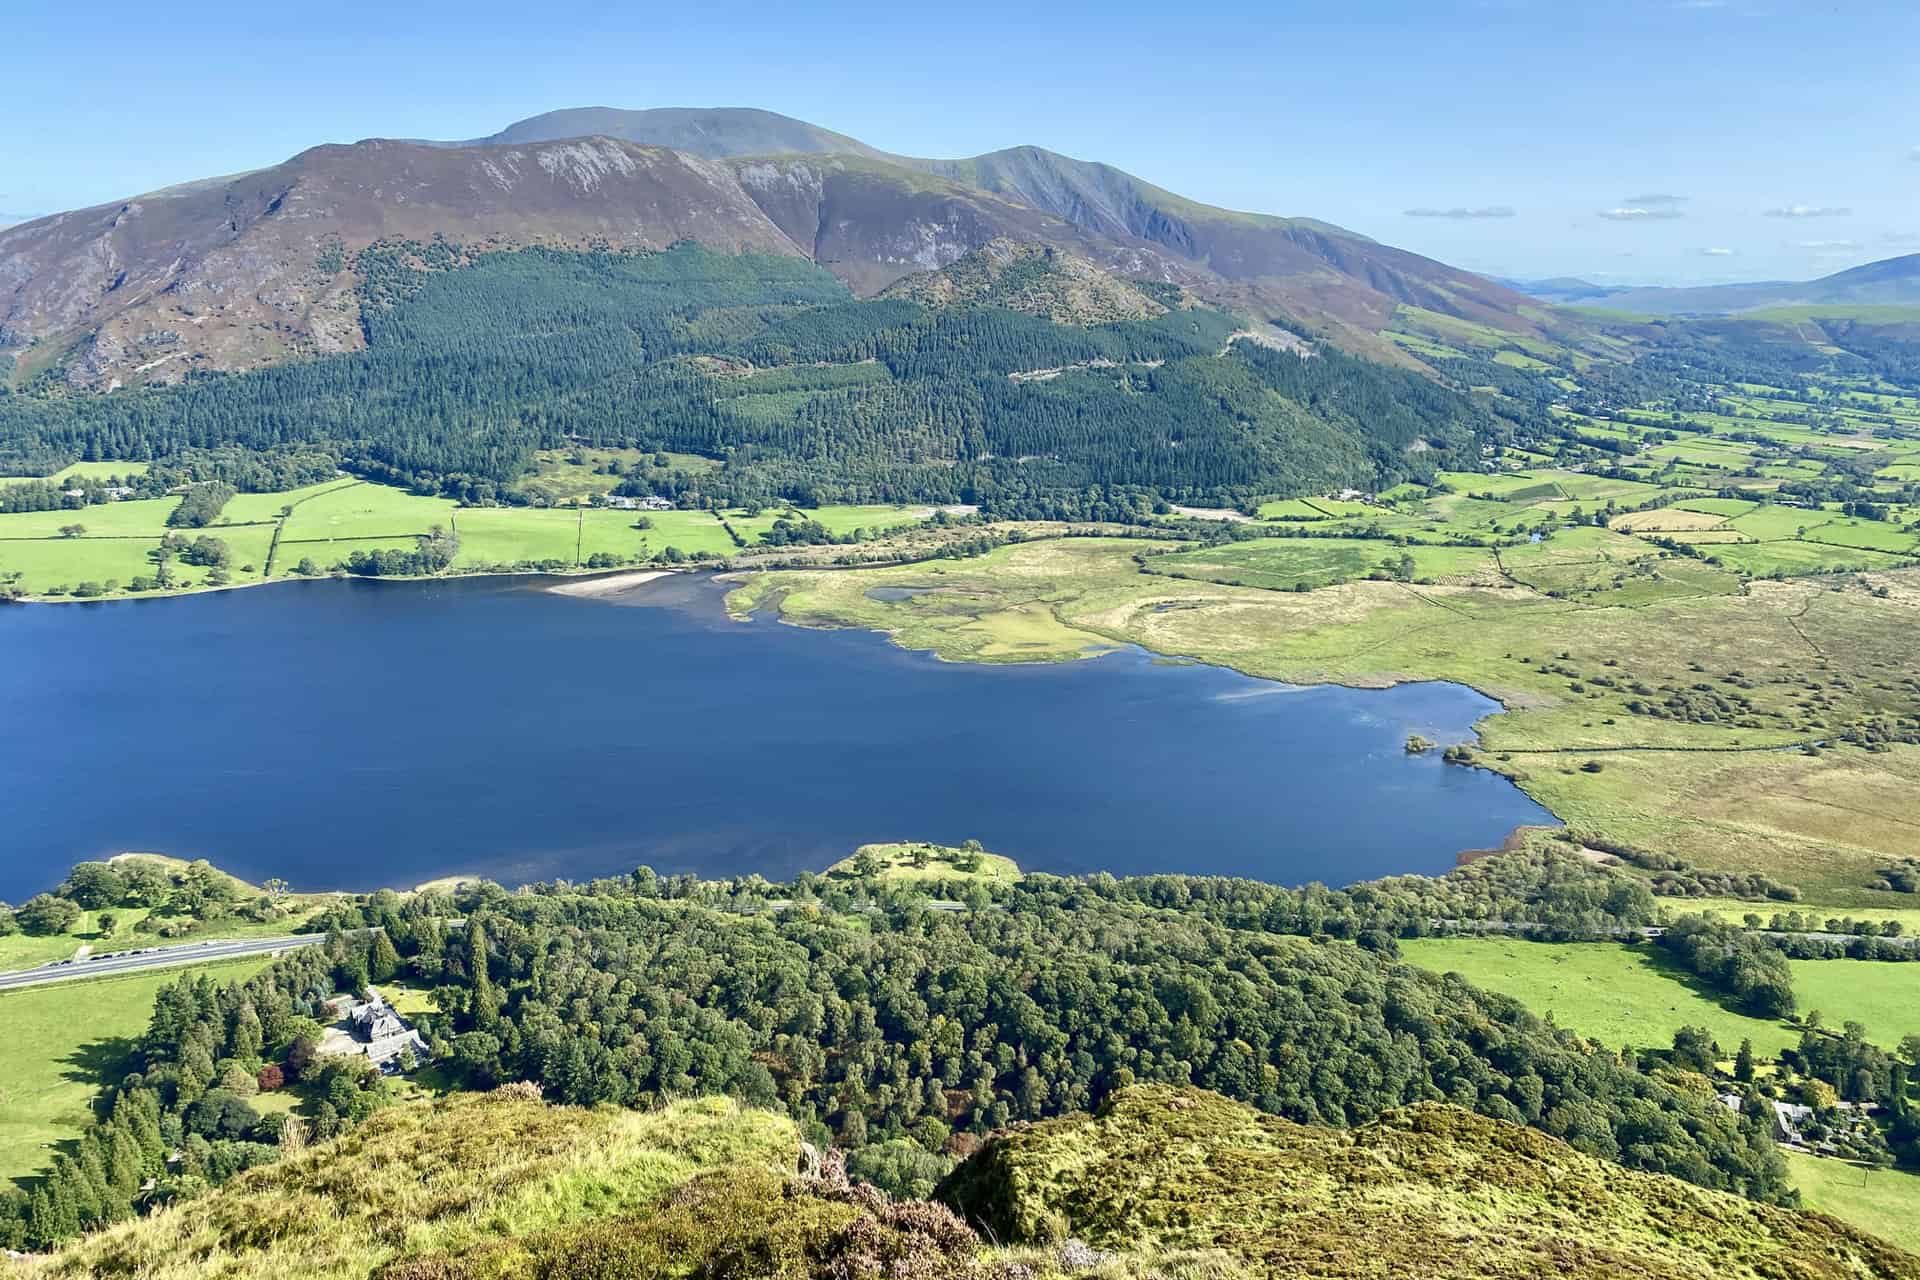 The southern extent of Bassenthwaite Lake and a few of the northern fells as seen from the summit of Barf. The smaller, tree-covered hill on the other side of the lake is Dodd. Behind Dodd are the peaks of Carl Side, Long Side and Ullock Pike. At the back are the summits of Little Man and Skiddaw.